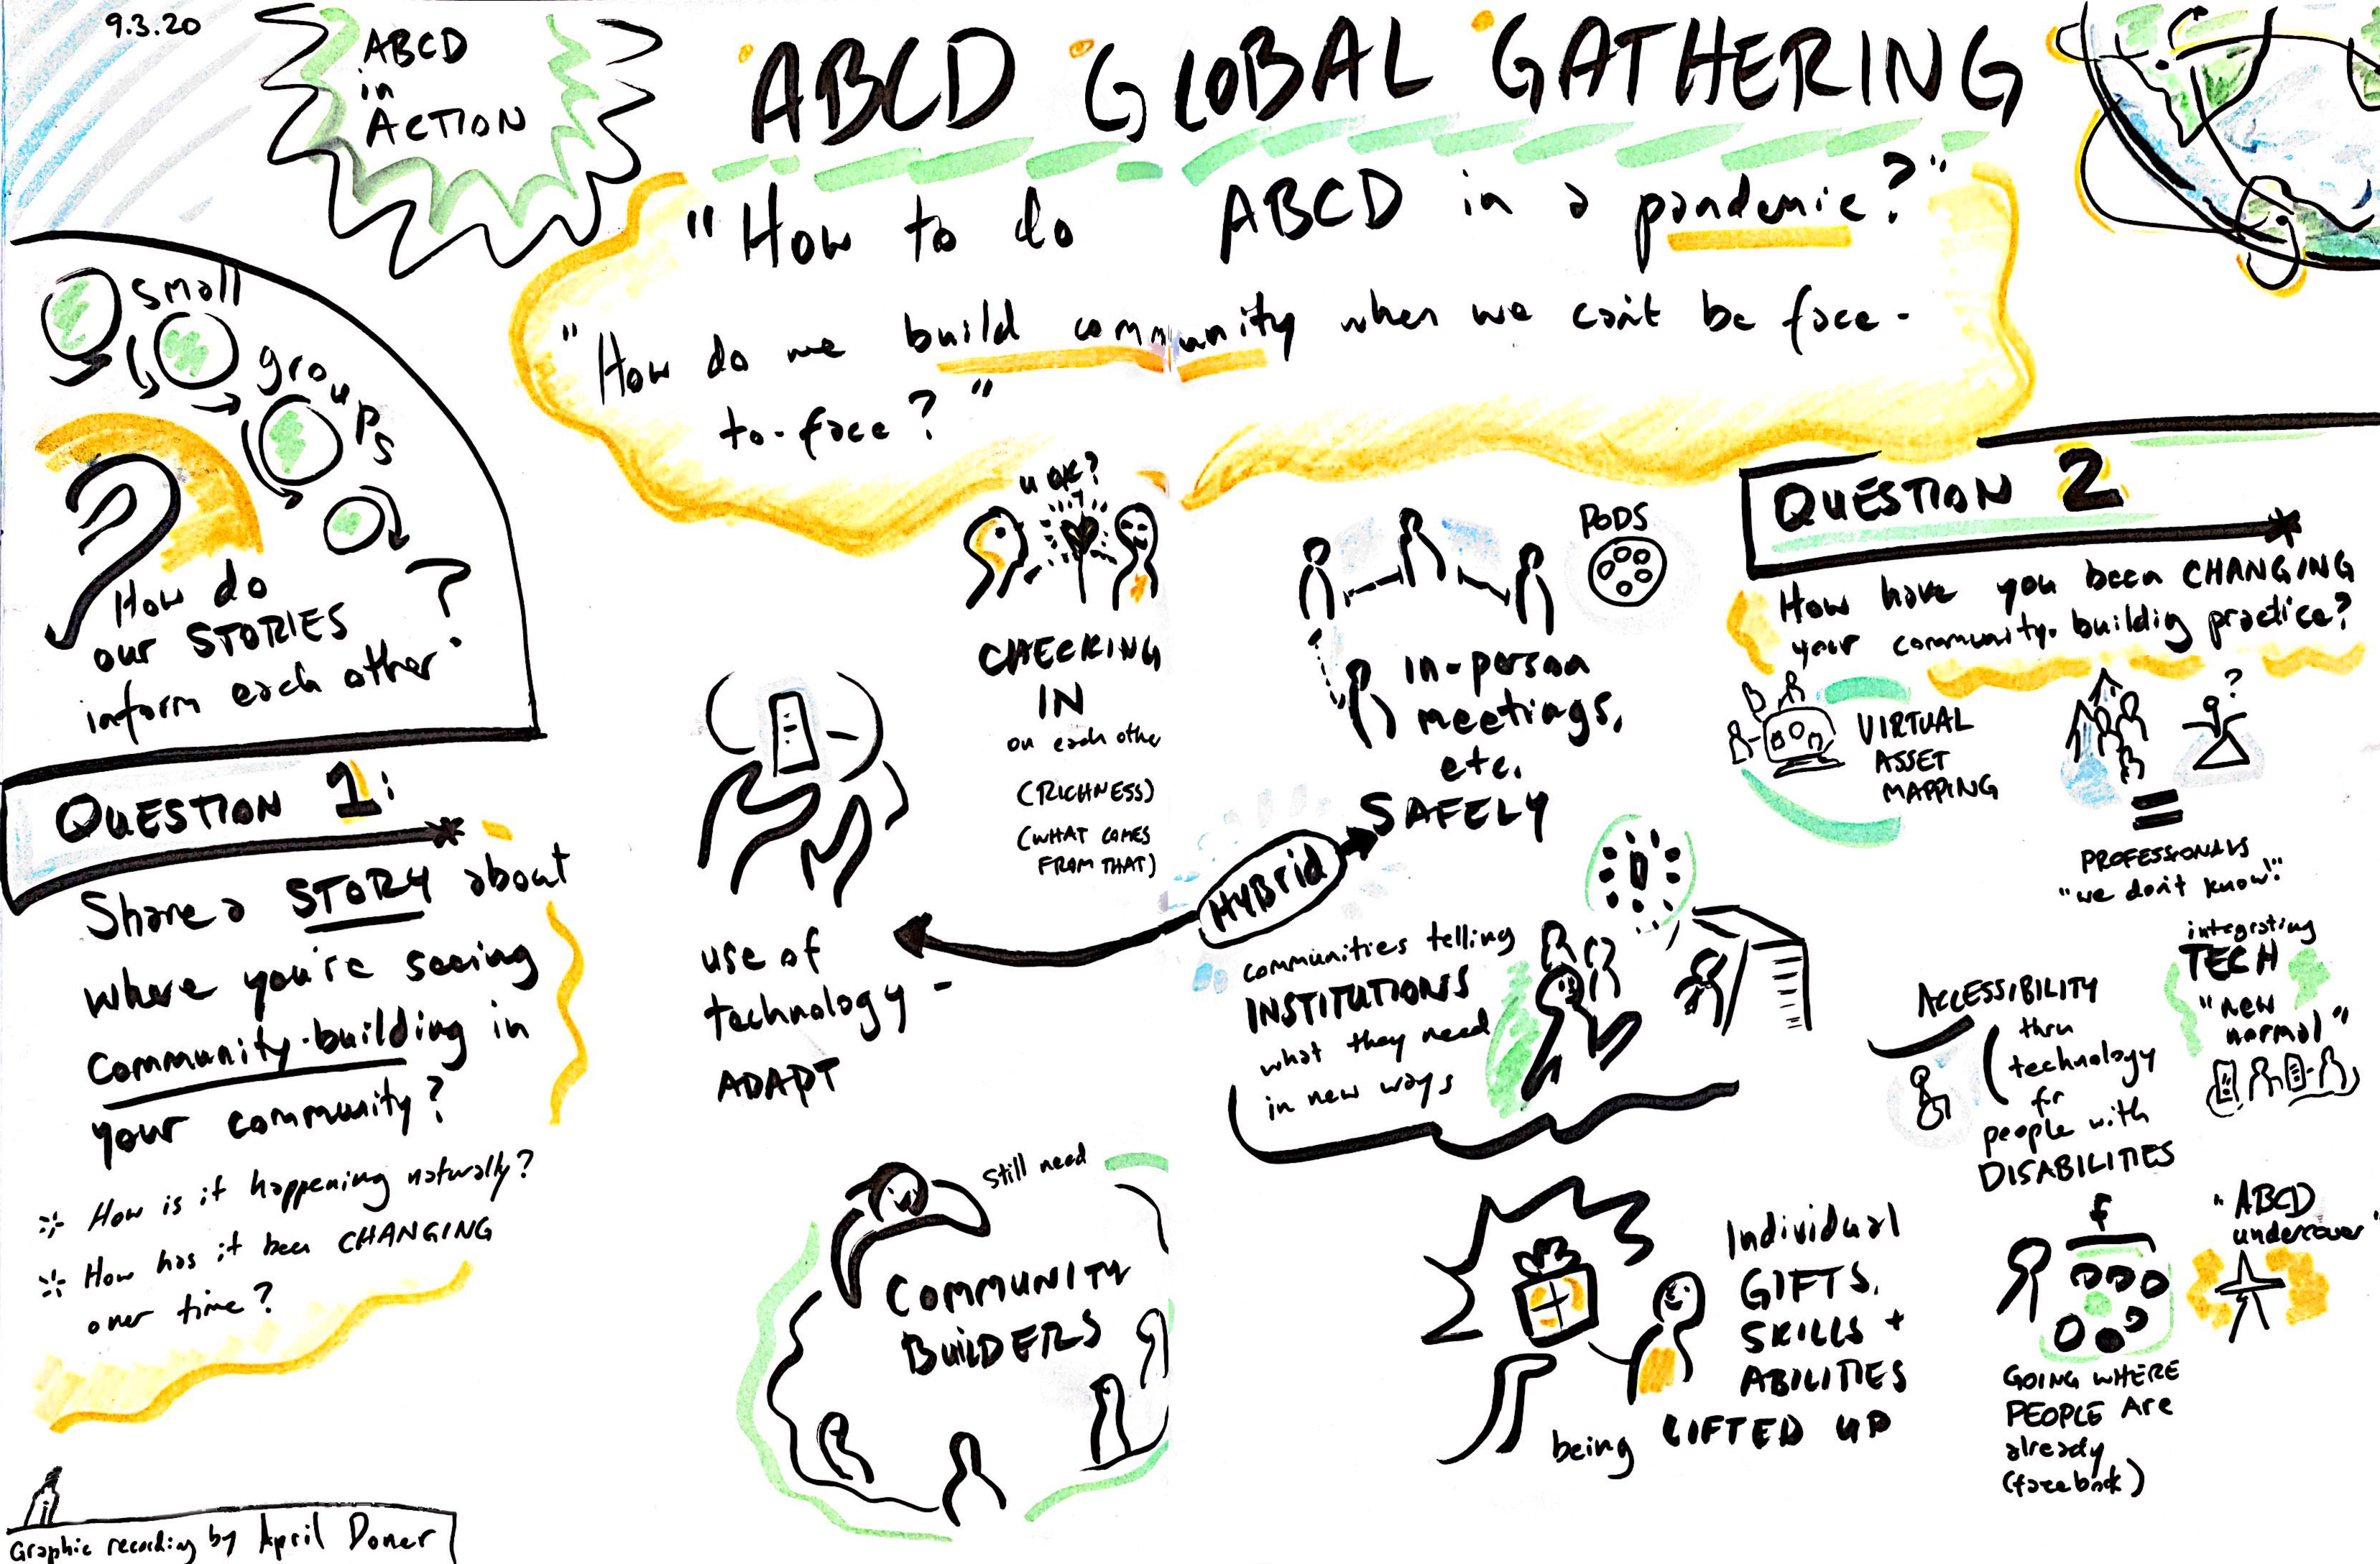 ABCD in Action Global Gathering_2020.9.3.jpg